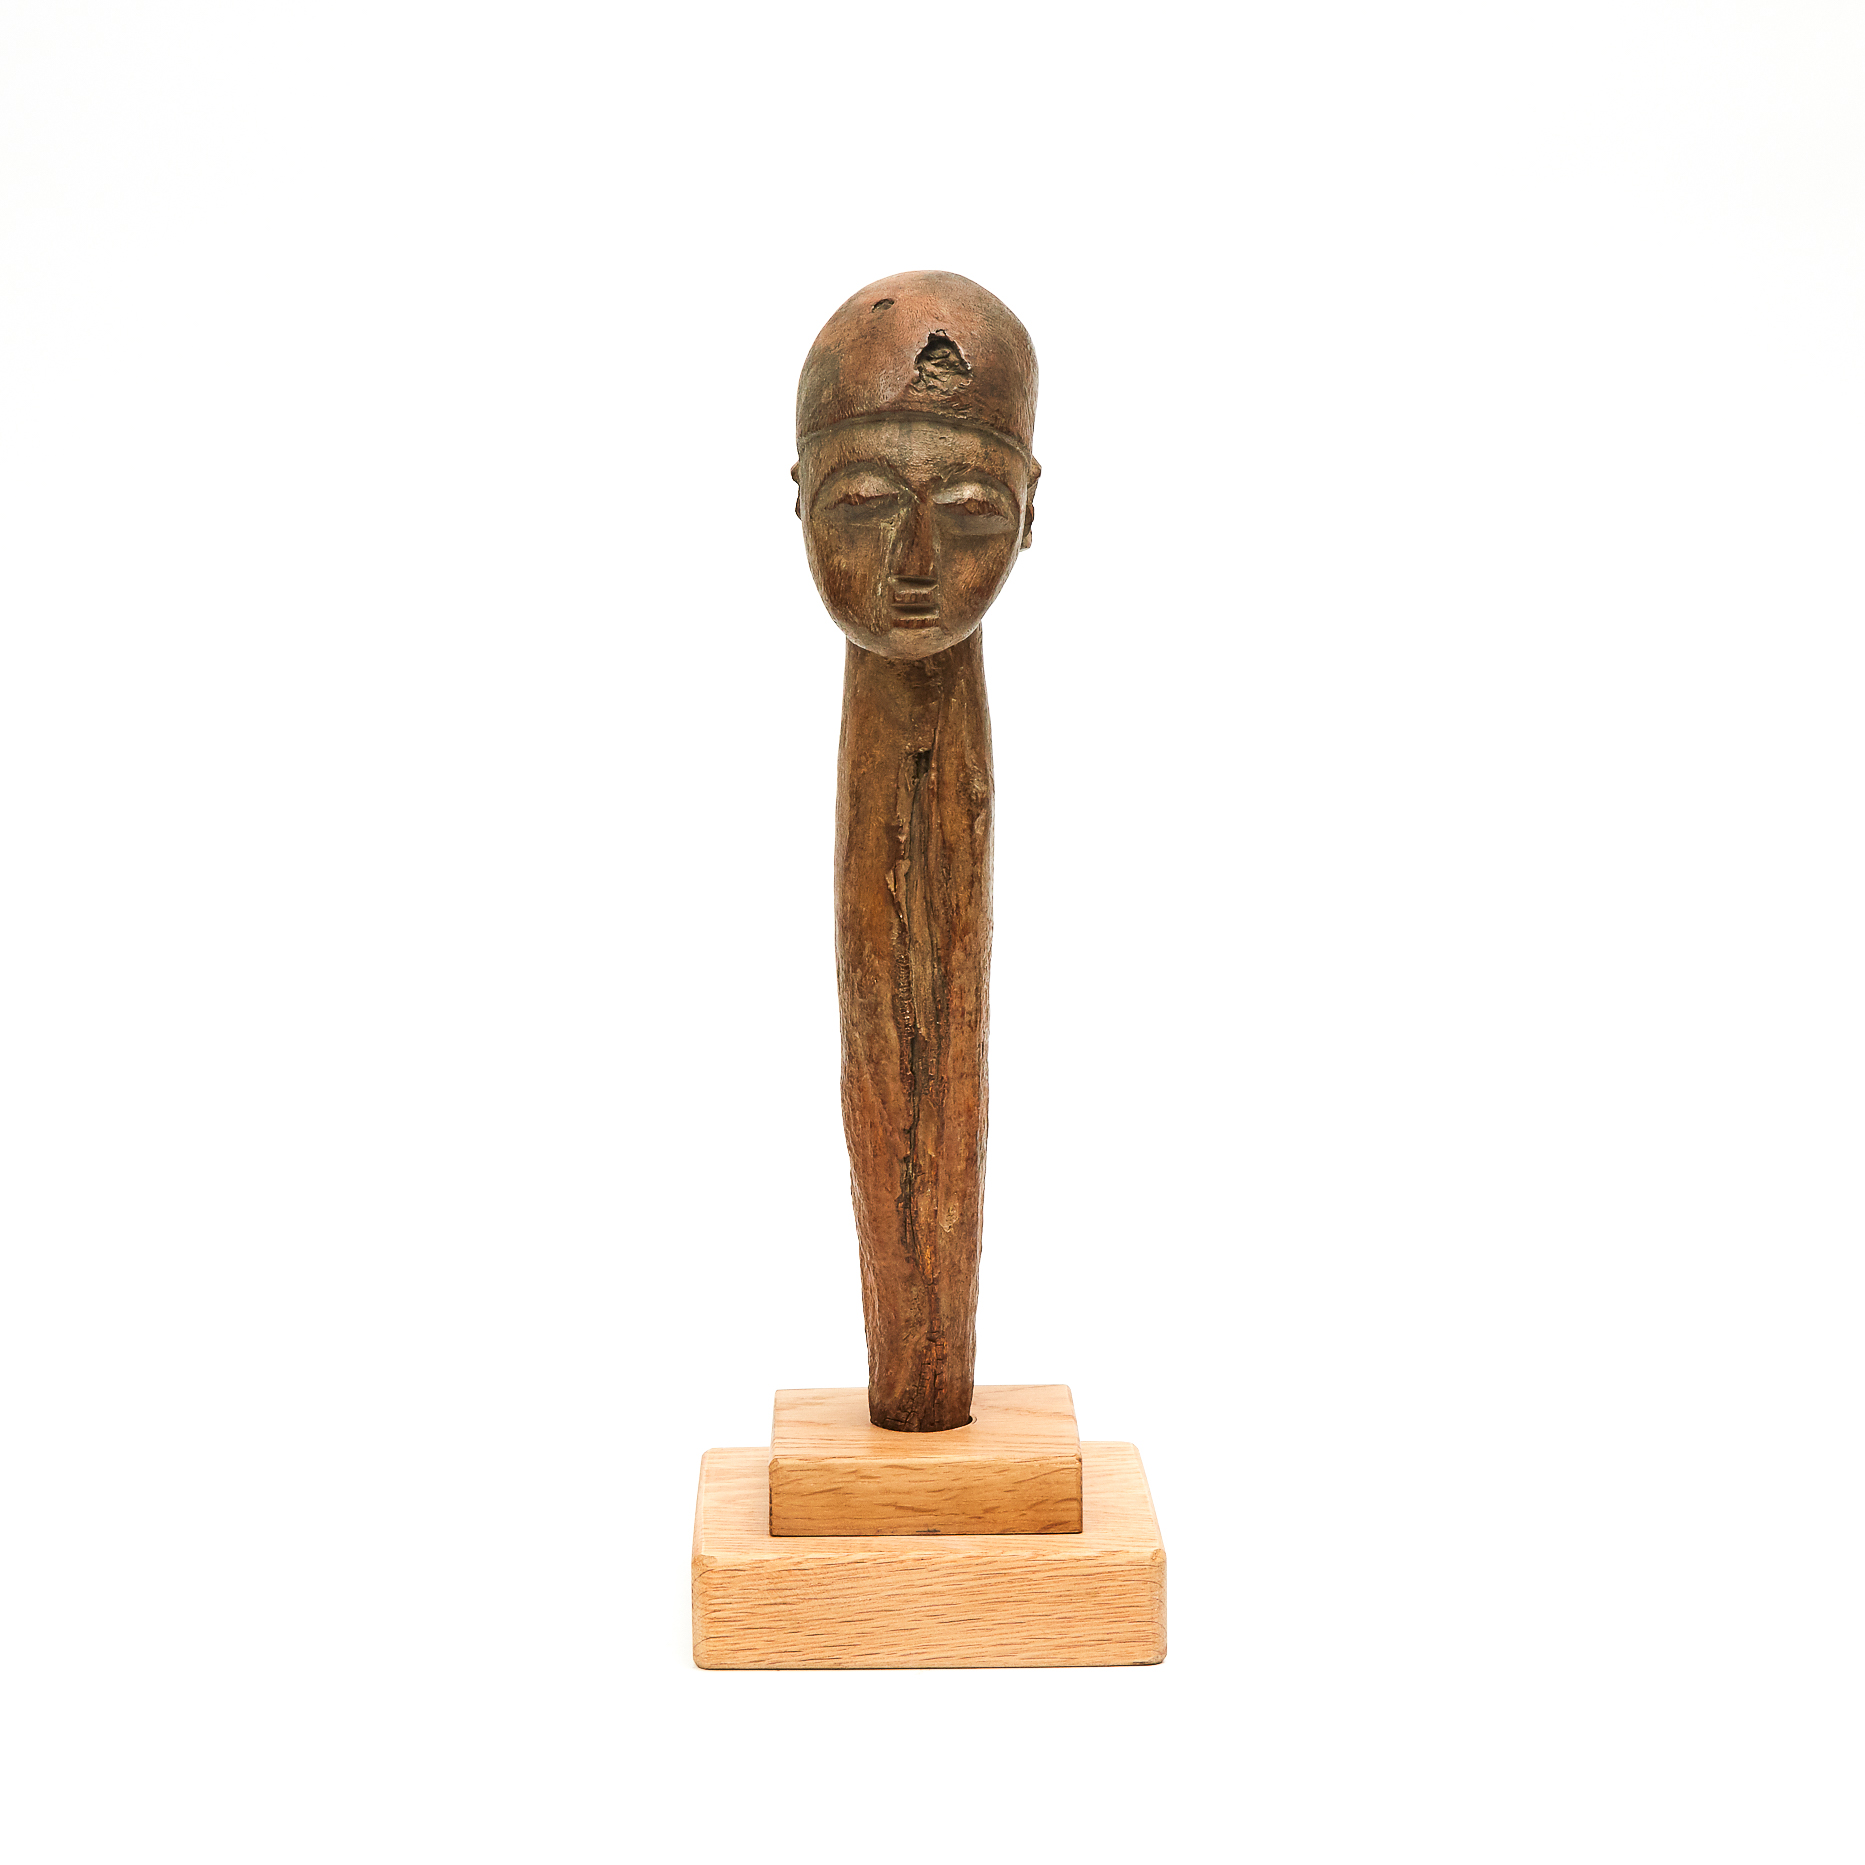 Lobi Head, early to mid 20th century, West Africa